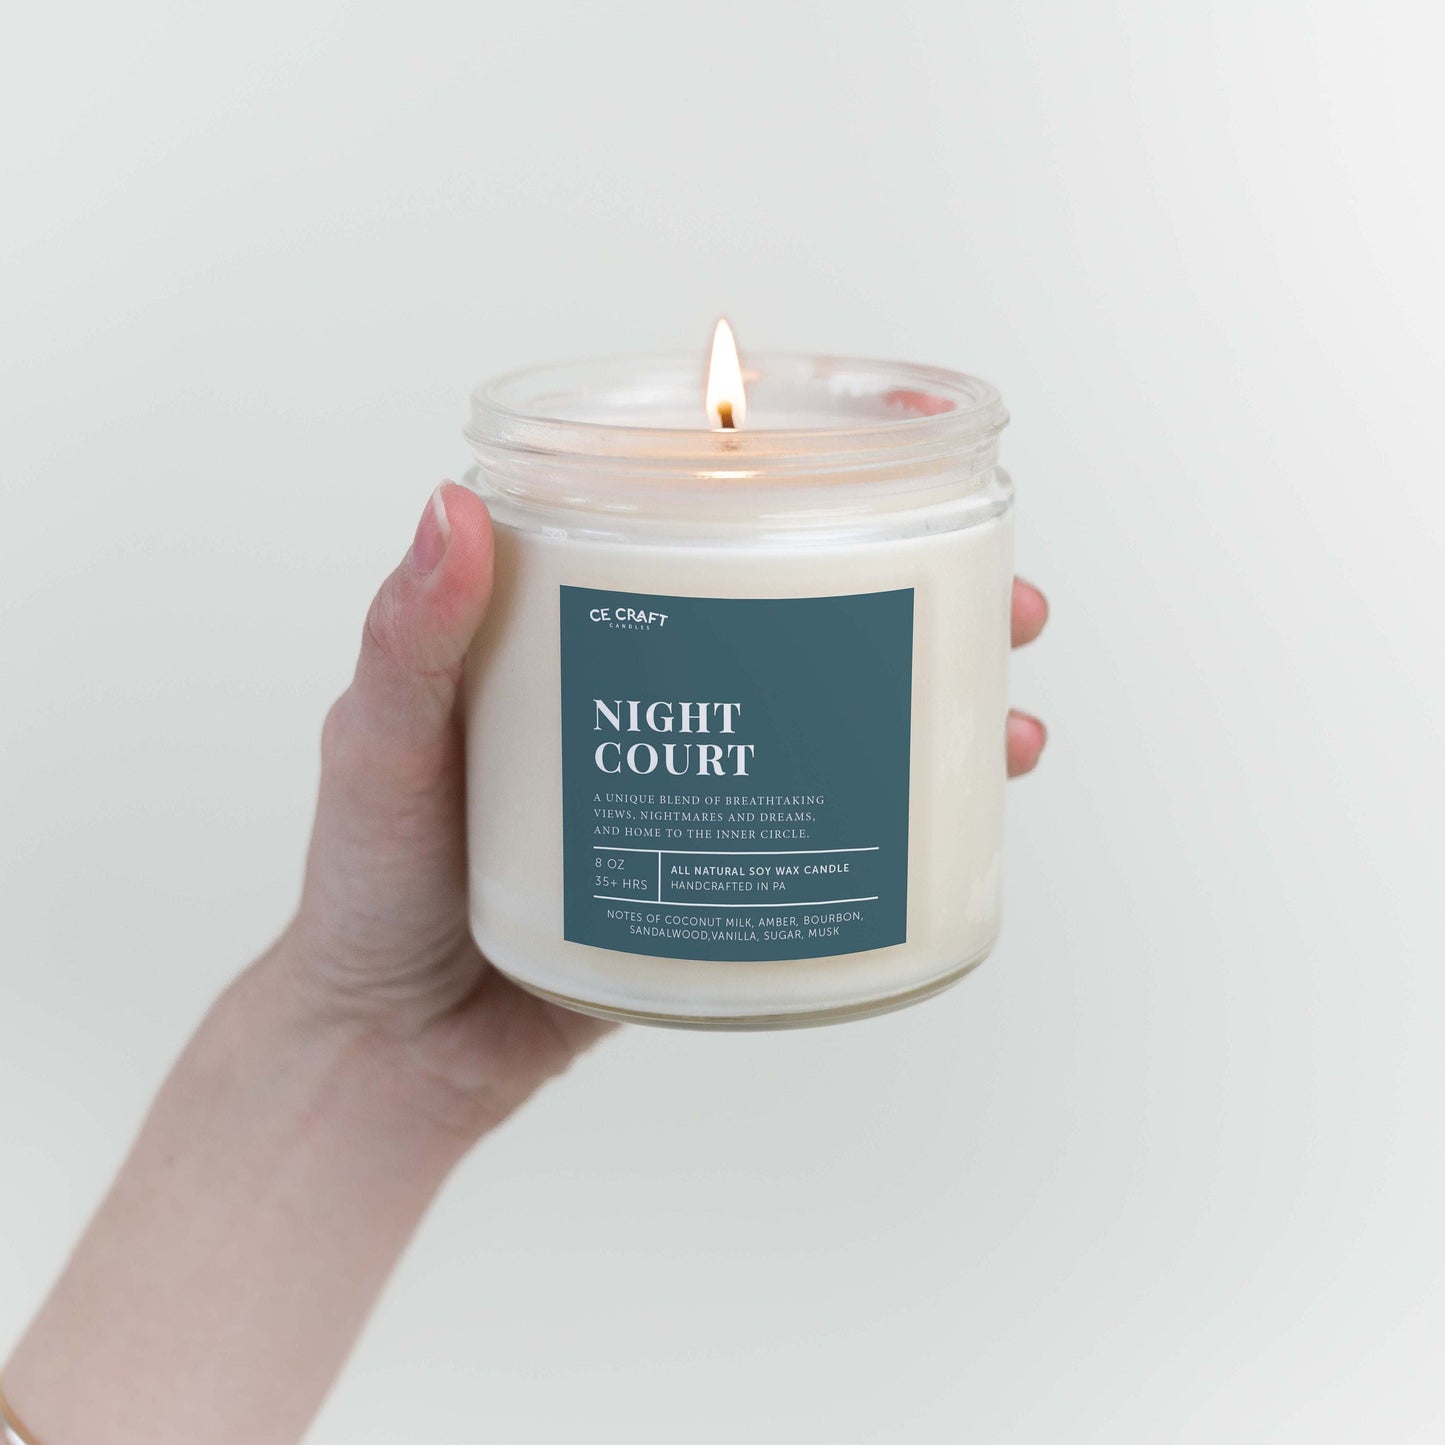 Night Court Scented Soy Wax Candle - A Court of Thrones and Roses InspireD C & E Craft Co 